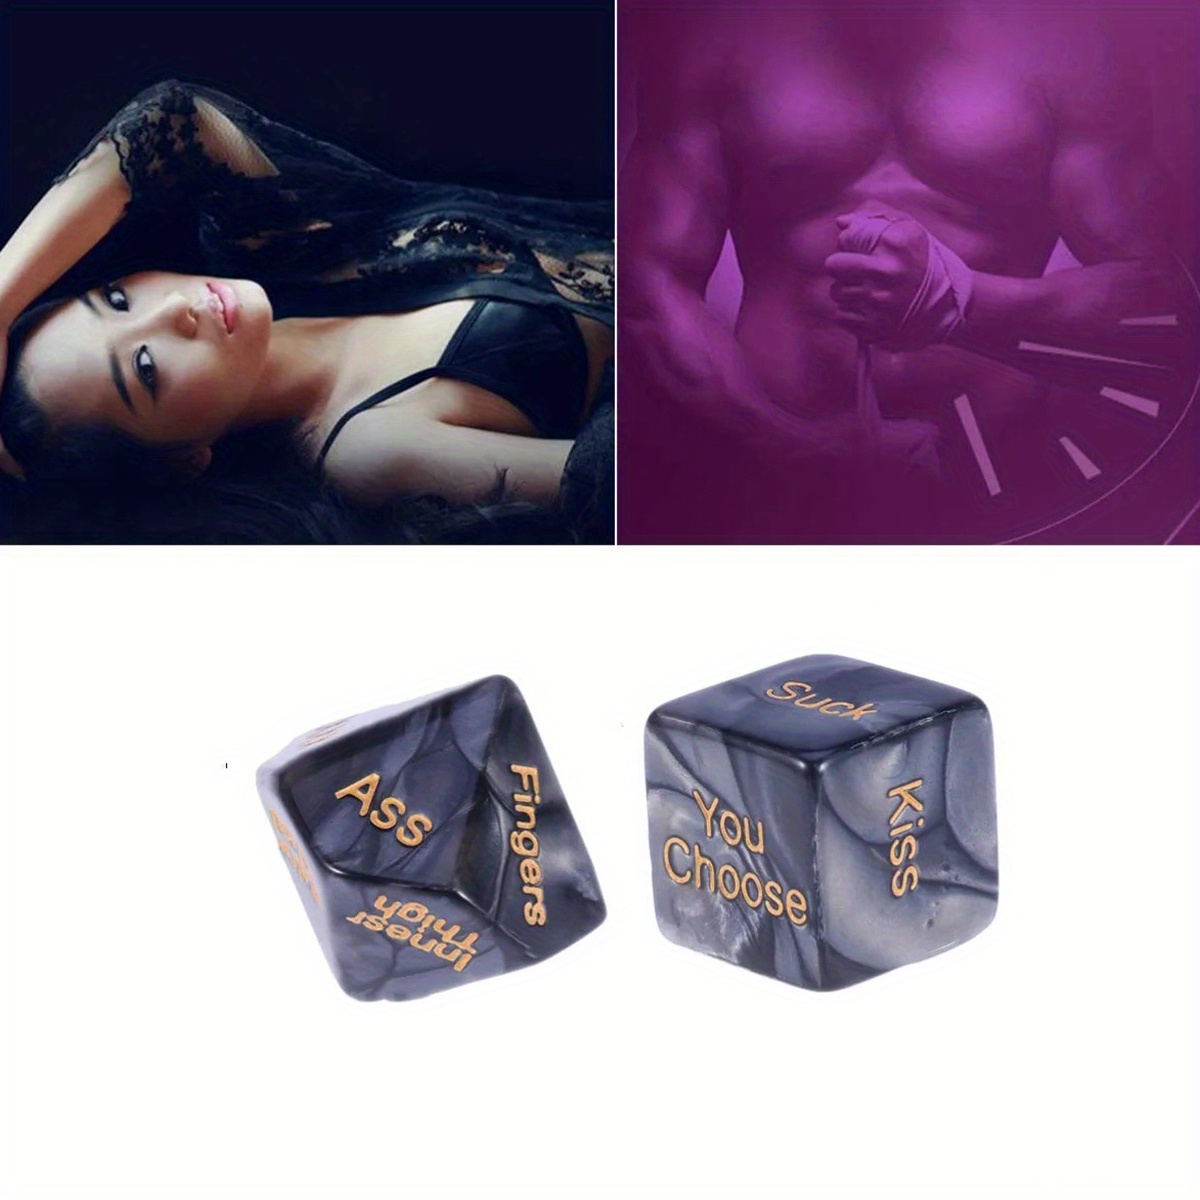 Sex Dice For Adult Couples Sex Games, Couples Toys